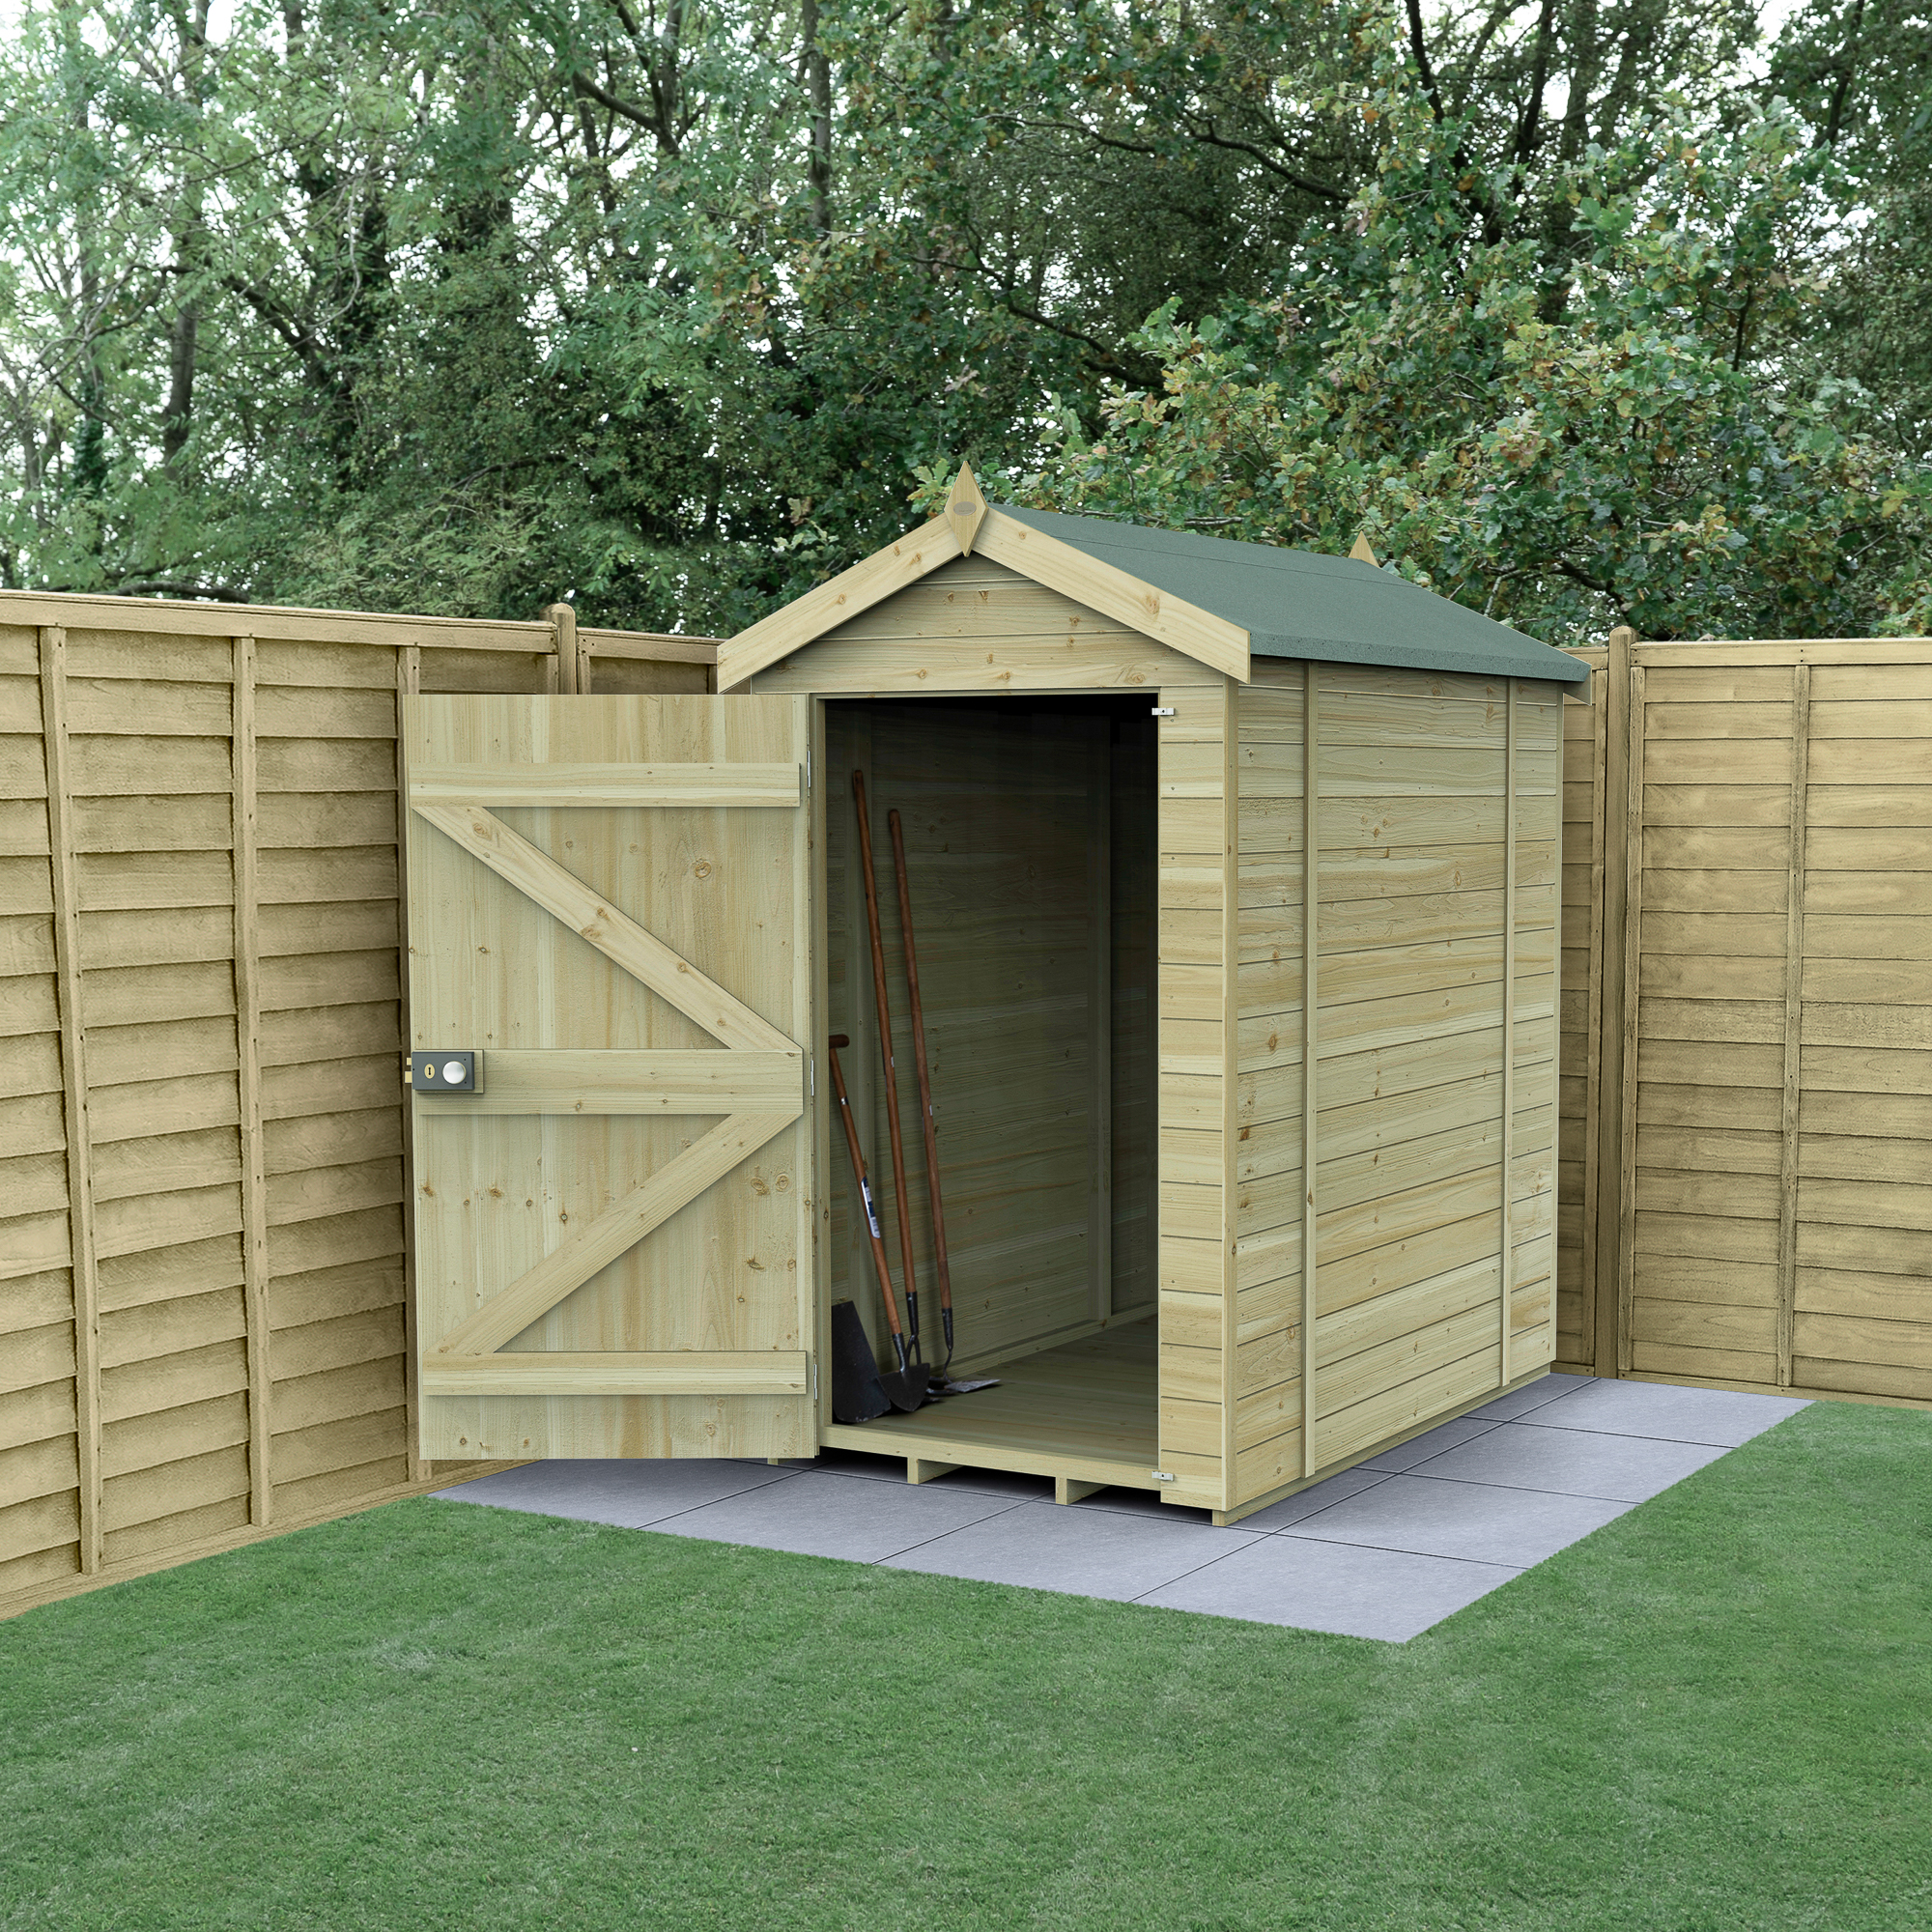 Forest Garden Timberdale 4 x 6ft Apex Tongue & Groove Pressure Treated Windowless Shed with Base